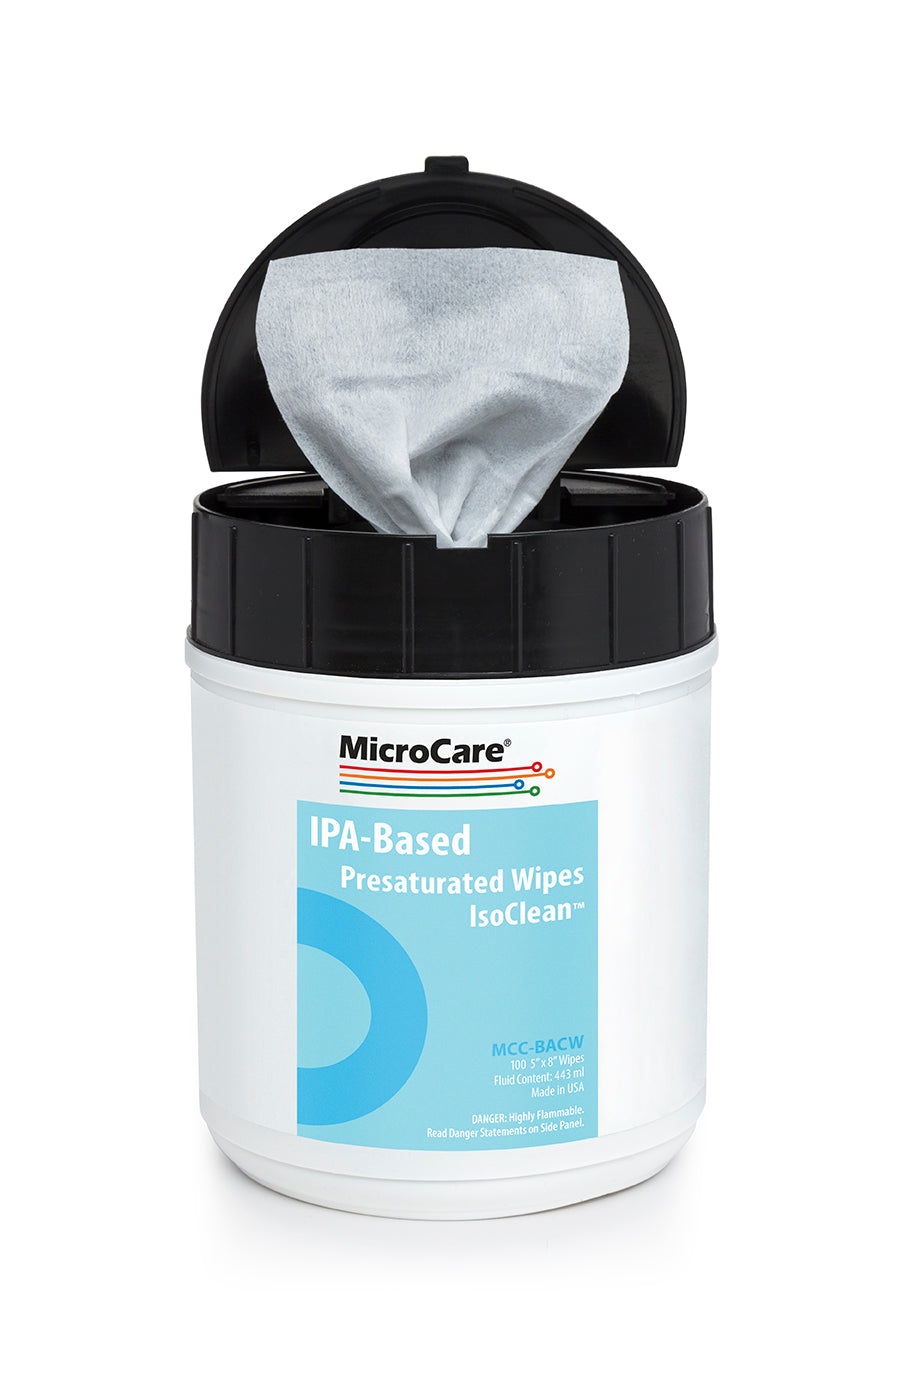 MicroCare MCC-BACW IsoClean Hi-Purity 99% Isopropyl Alcohol Cleaning Wipes, Tub of 100, 8